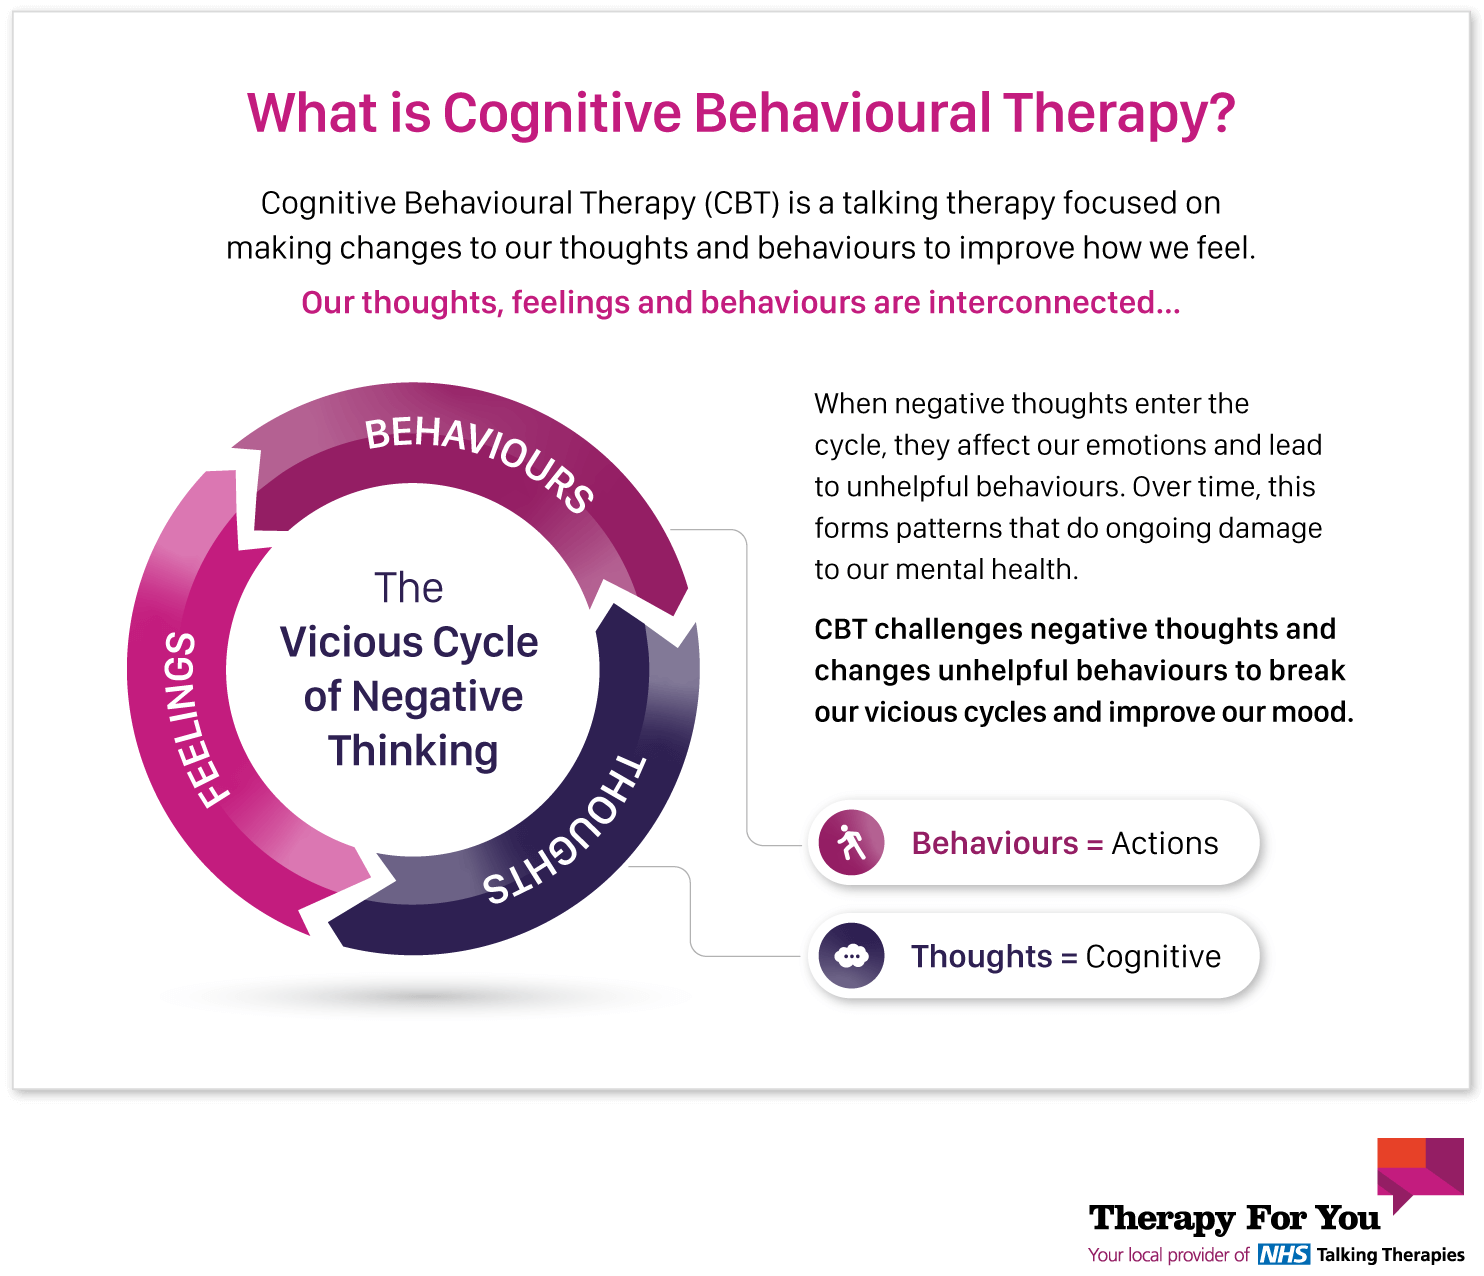 Infographic for what is cognitive behavioural therapy and how it helps negative thoughts and behaviours - Therapy For You